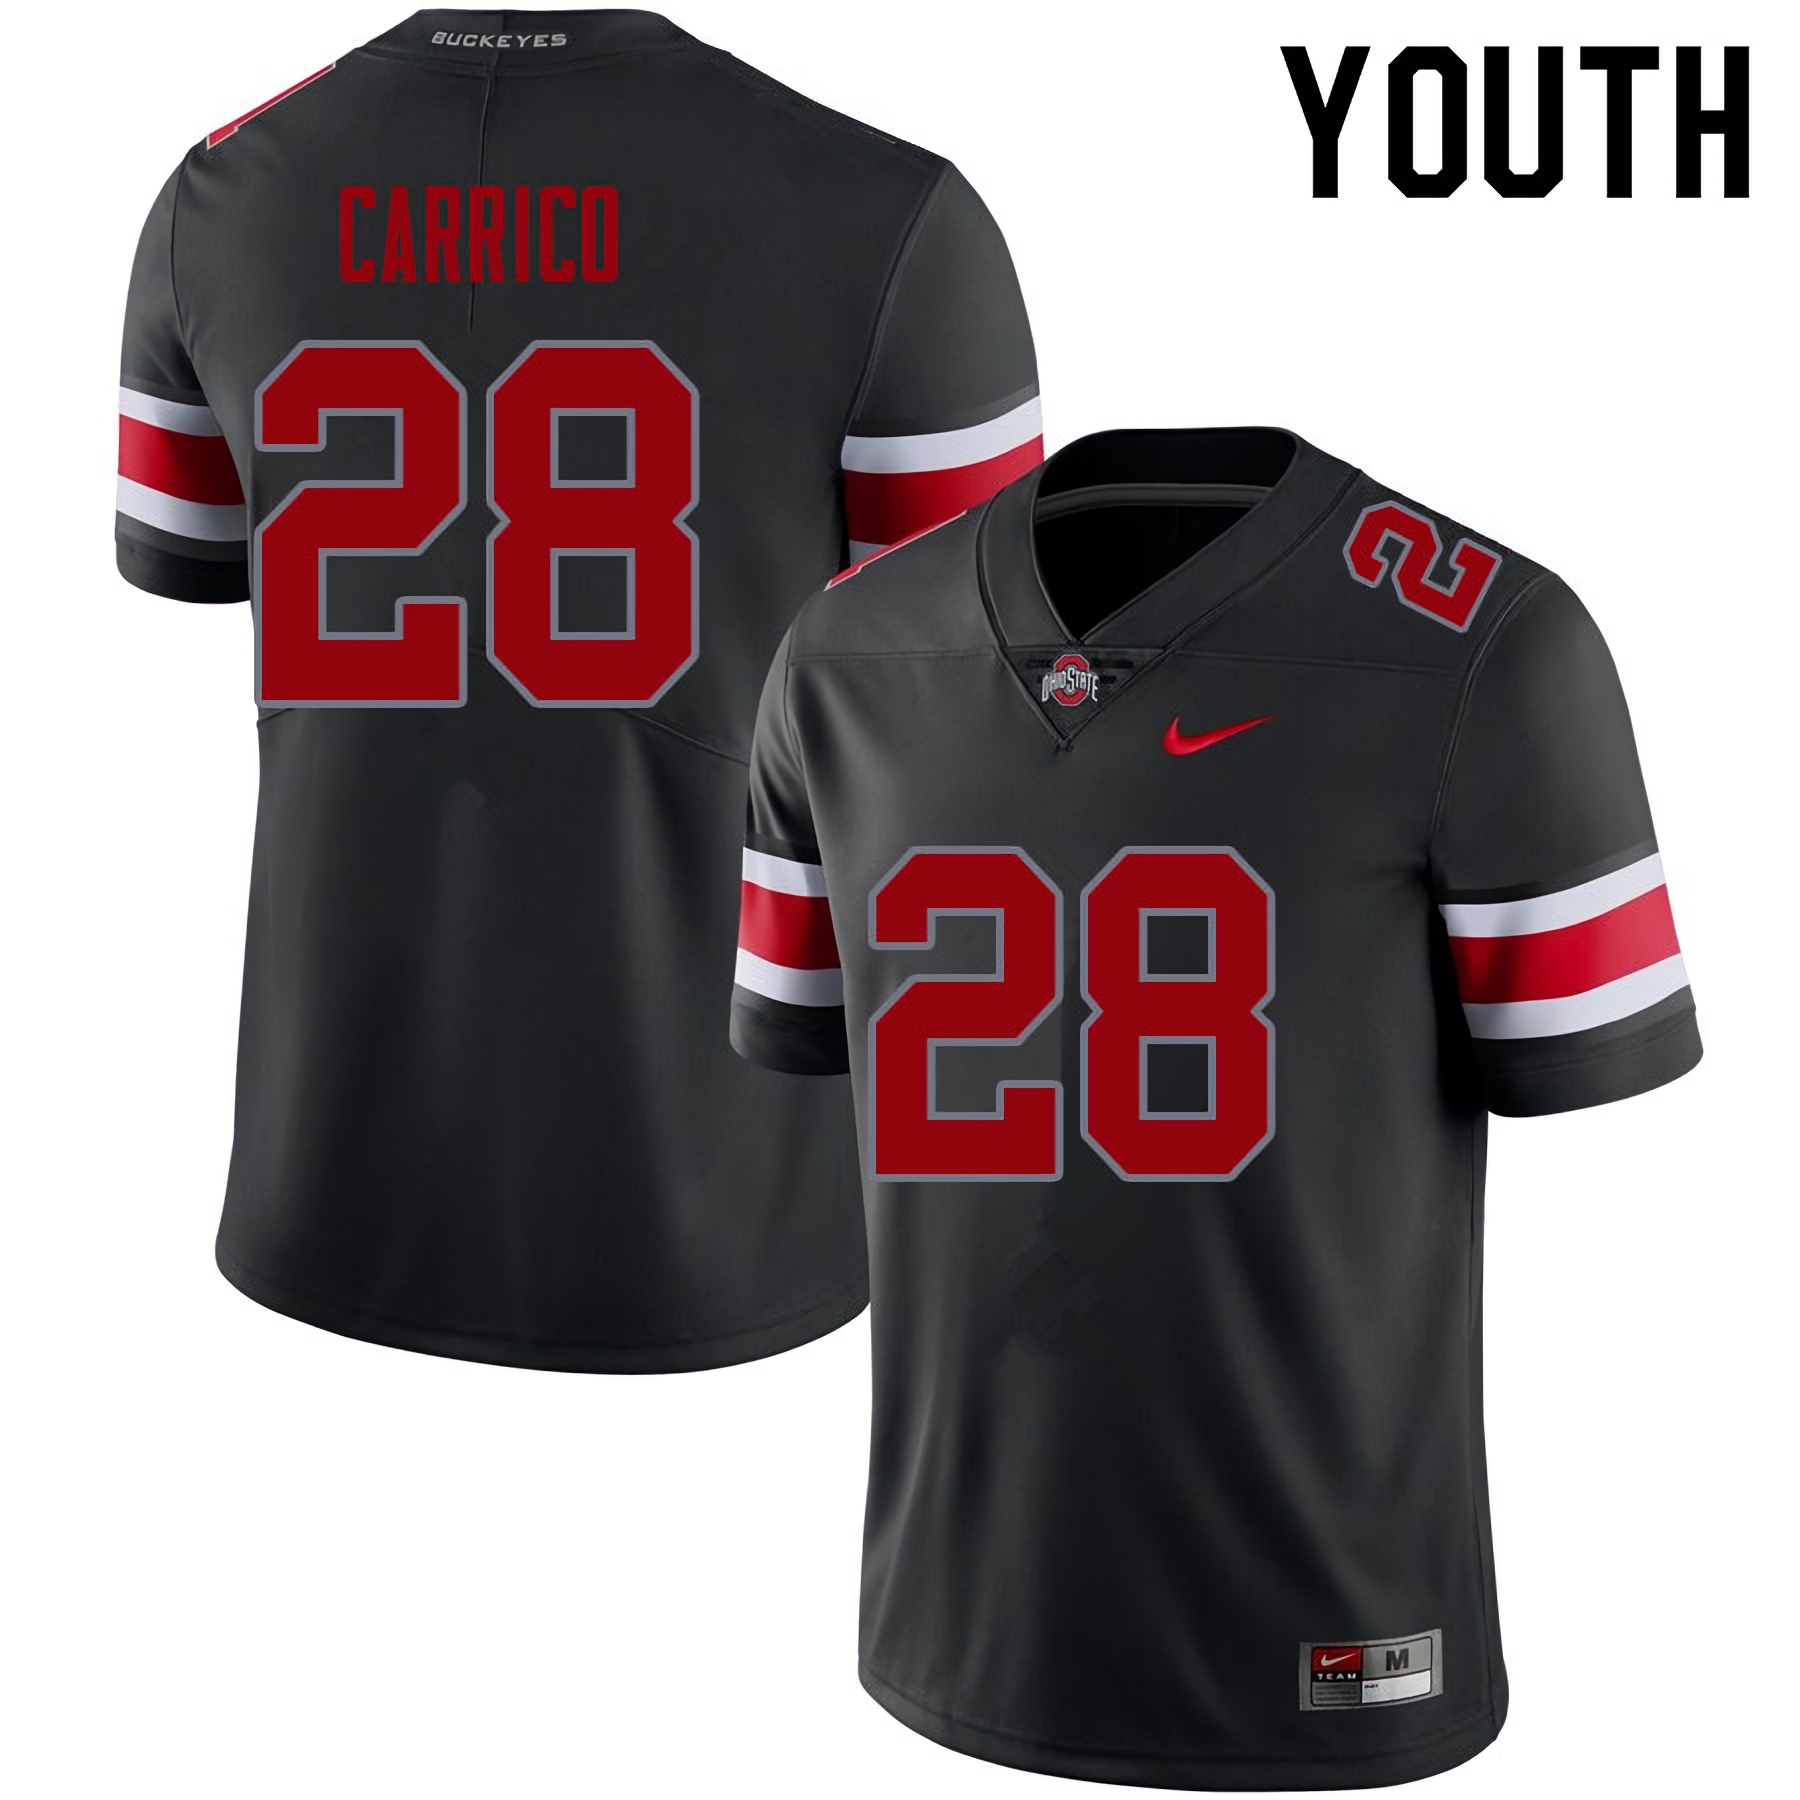 Reid Carrico Ohio State Buckeyes Youth NCAA #28 Black Red Number College Stitched Football Jersey VGF6556JY